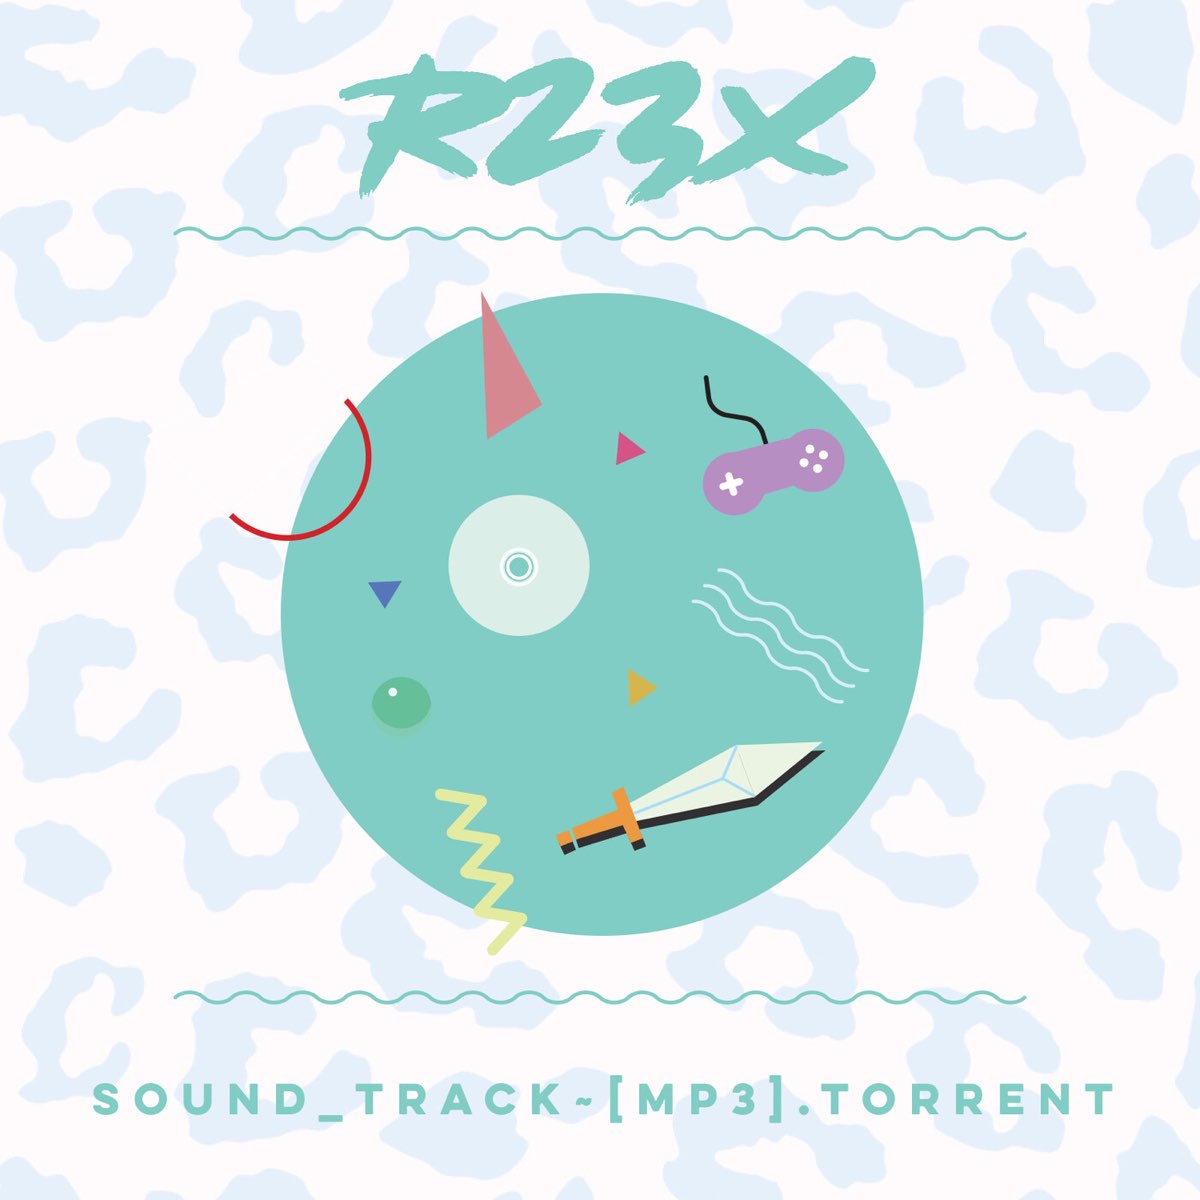 SOUND_TRACK ~ [MP3].Torrent by R23X on Apple Music